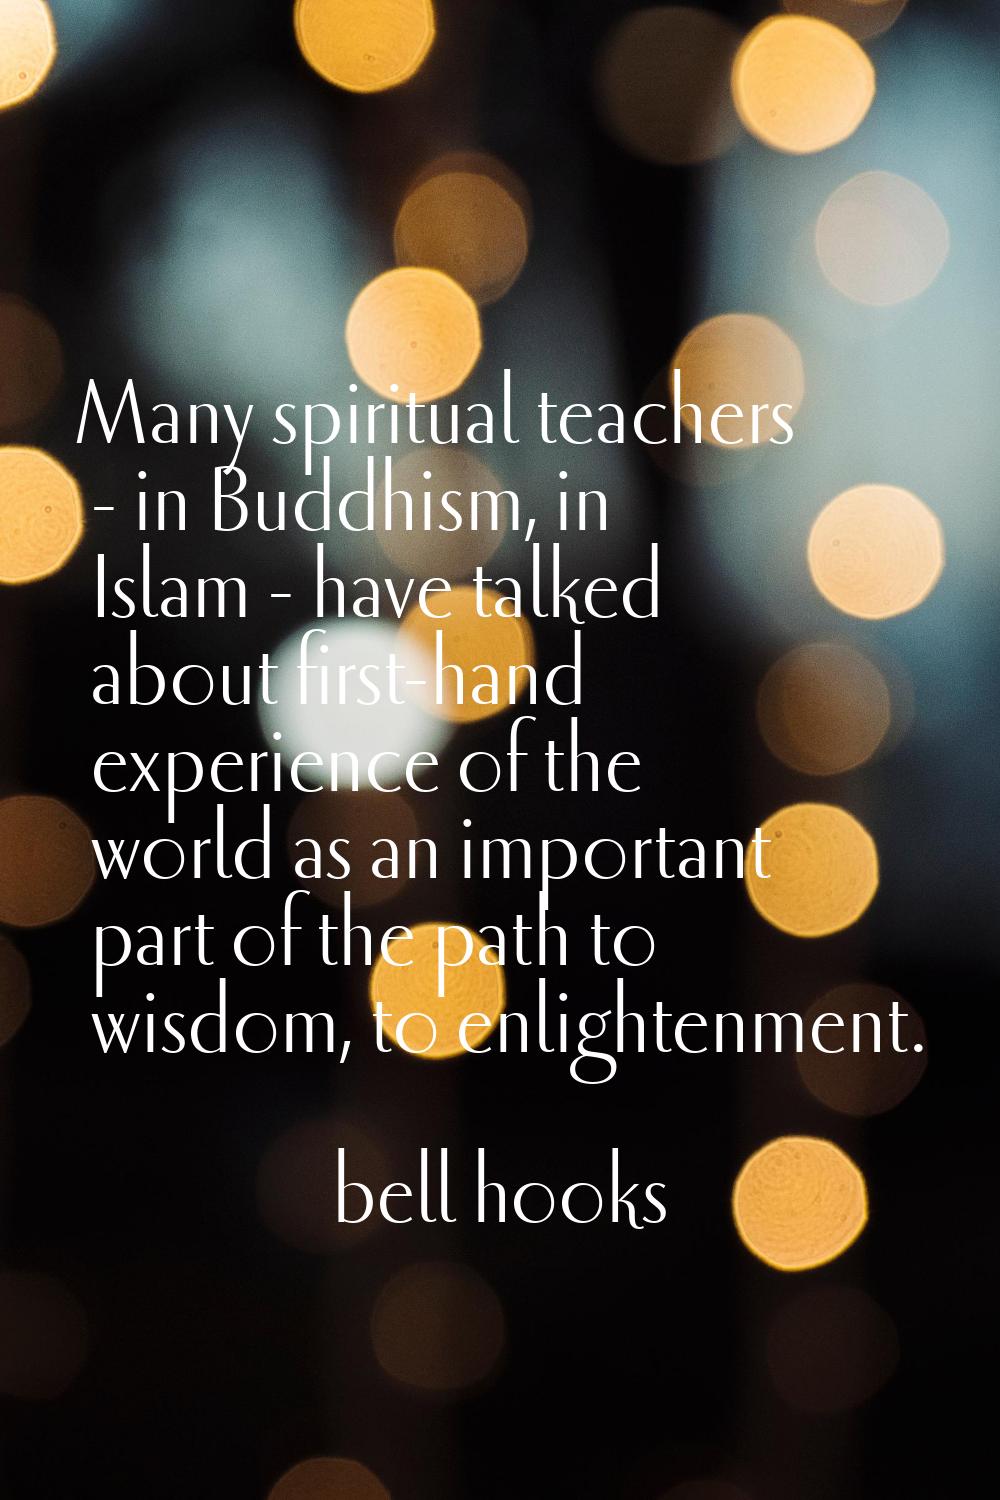 Many spiritual teachers - in Buddhism, in Islam - have talked about first-hand experience of the wo